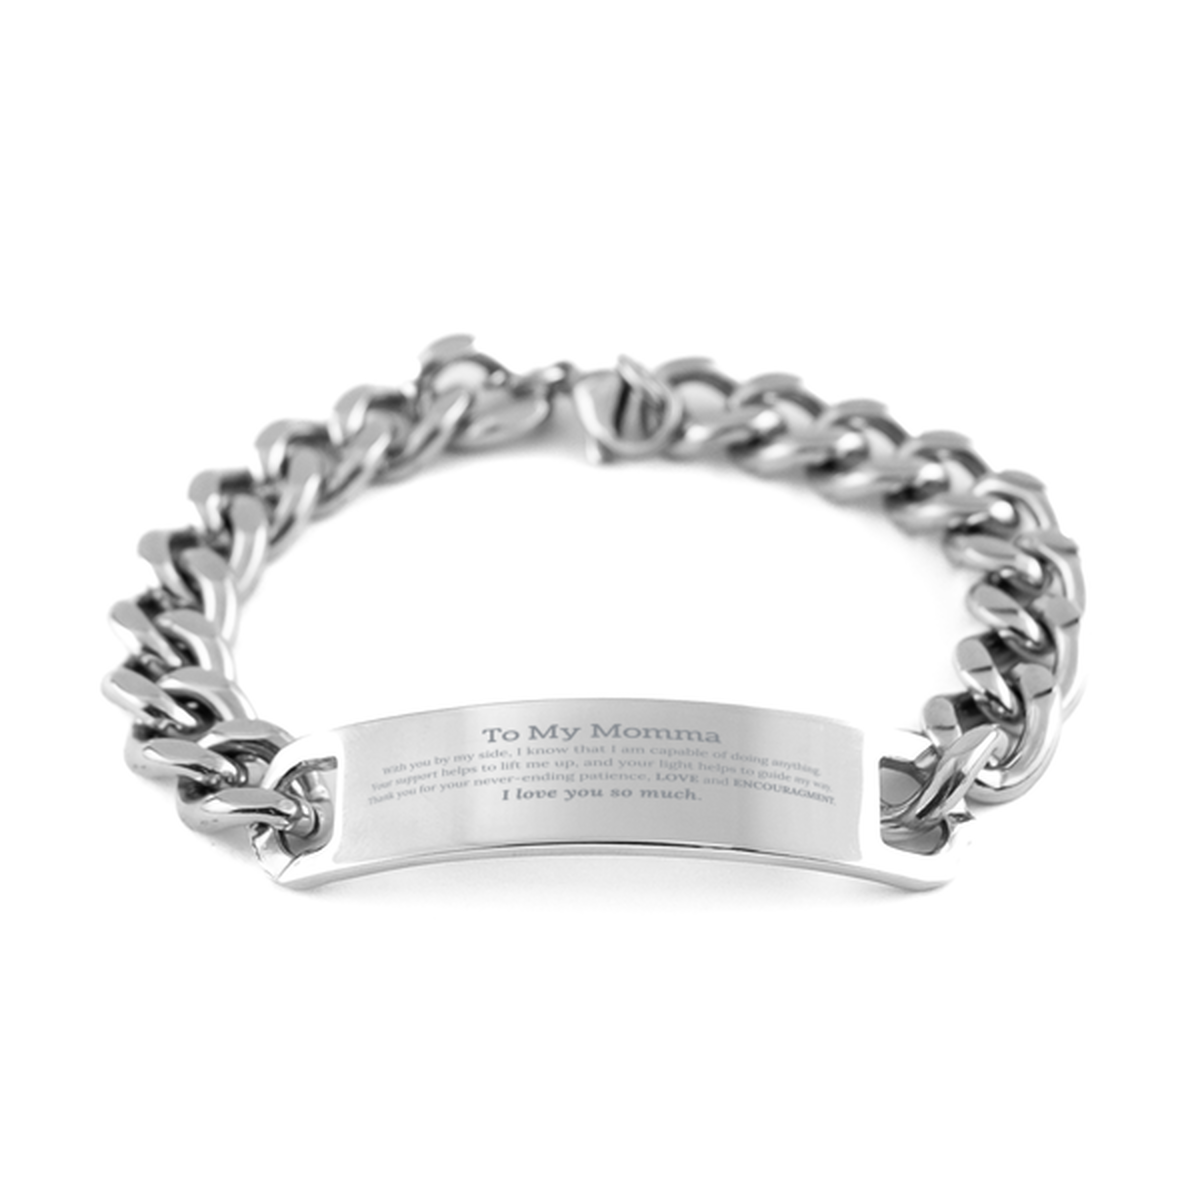 Appreciation Momma Cuban Chain Stainless Steel Bracelet Gifts, To My Momma Birthday Christmas Wedding Keepsake Gifts for Momma With you by my side, I know that I am capable of doing anything. I love you so much